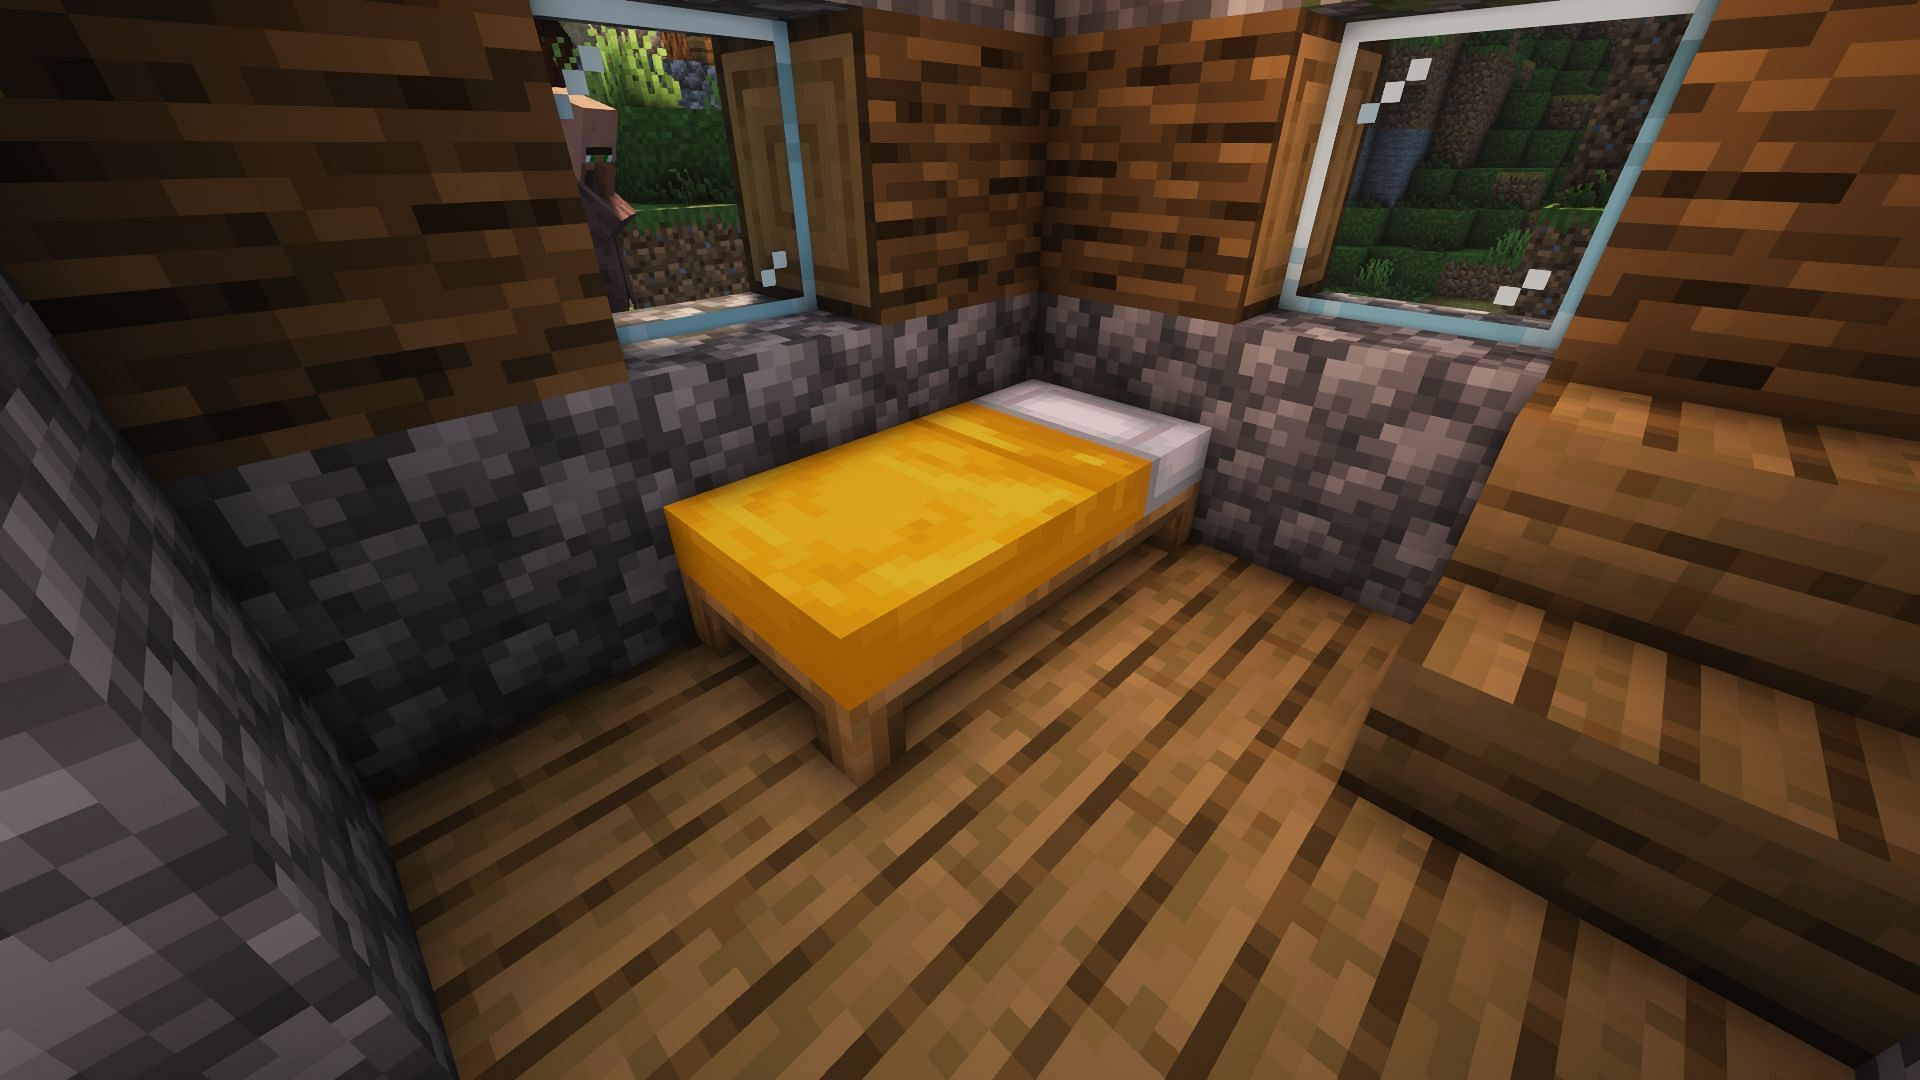 A bed in a village house (Image via Mojang)